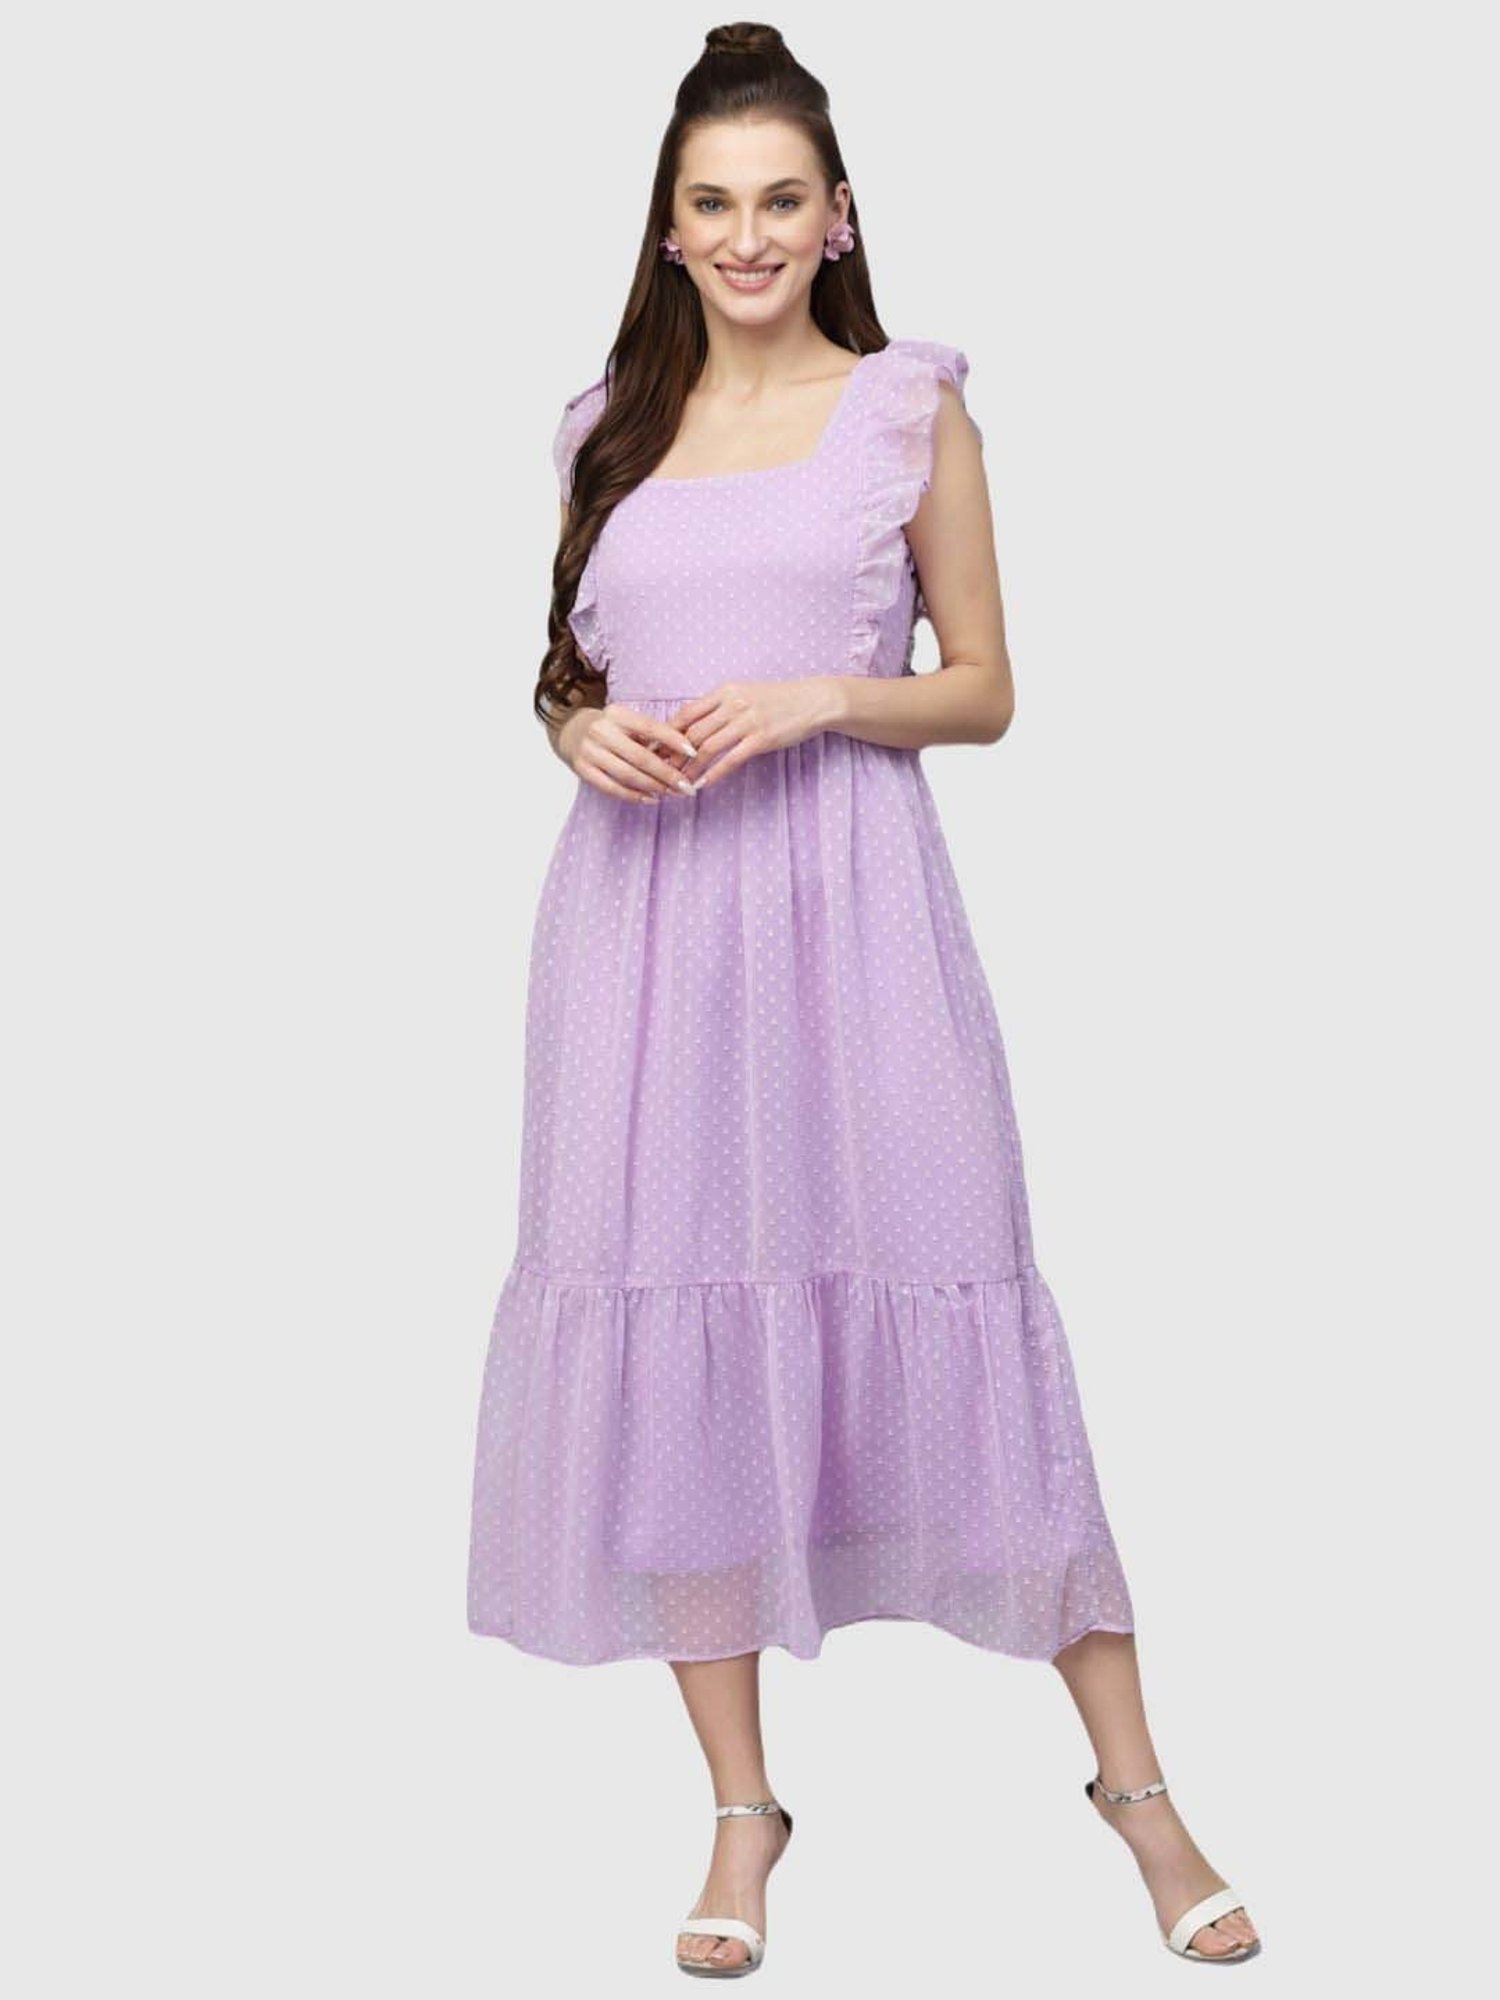 Plain lavender Net One Piece Dress, 3/4th Sleeves, Casual Wear at Rs 590/ piece in Indore